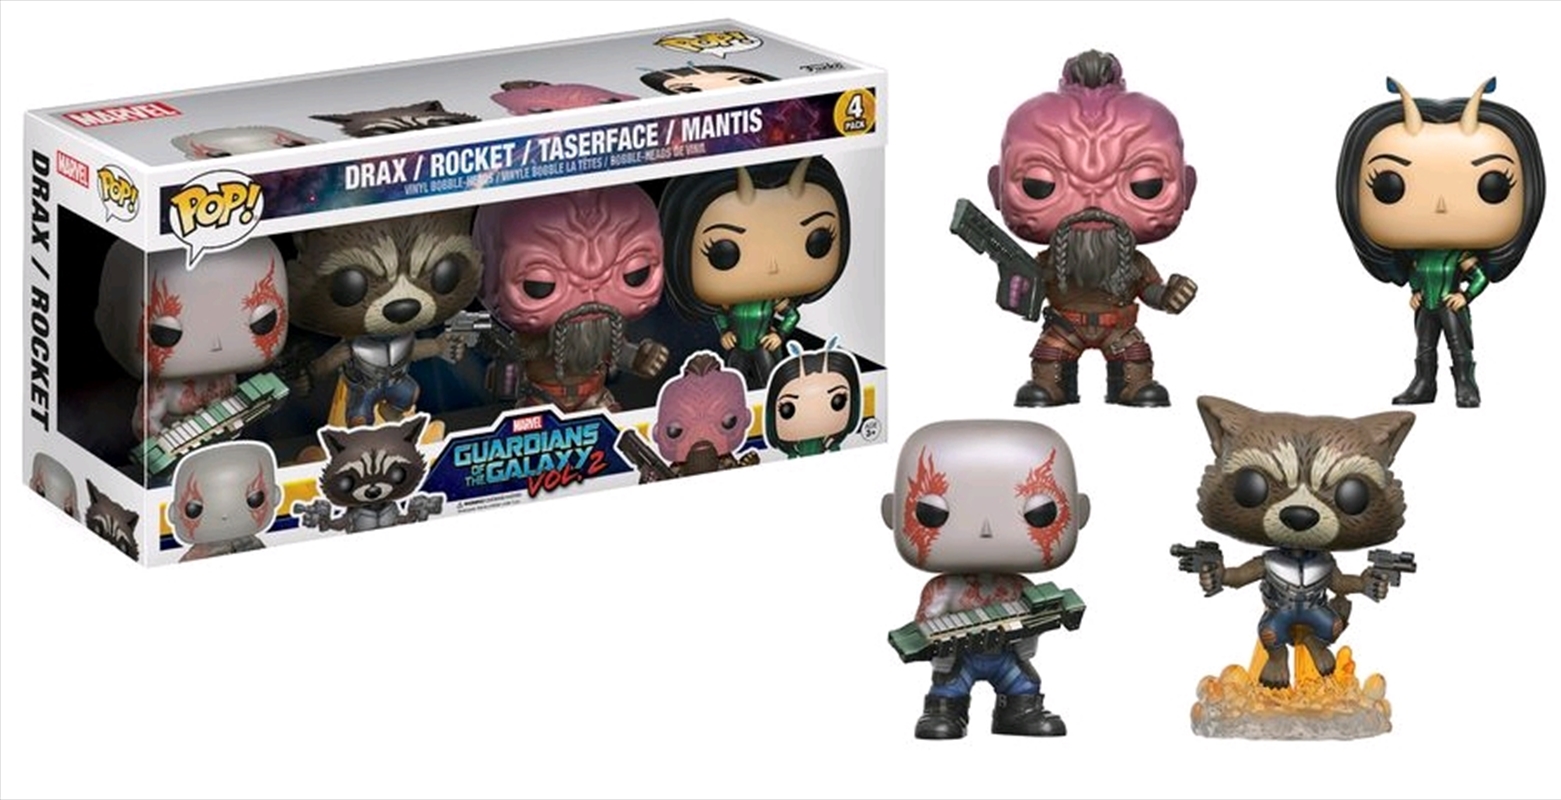 Guardians of the Galaxy: Vol. 2 - Drax, Rocket, Taserface & Mantis US Exclusive Pop! 4Pack/Product Detail/Movies